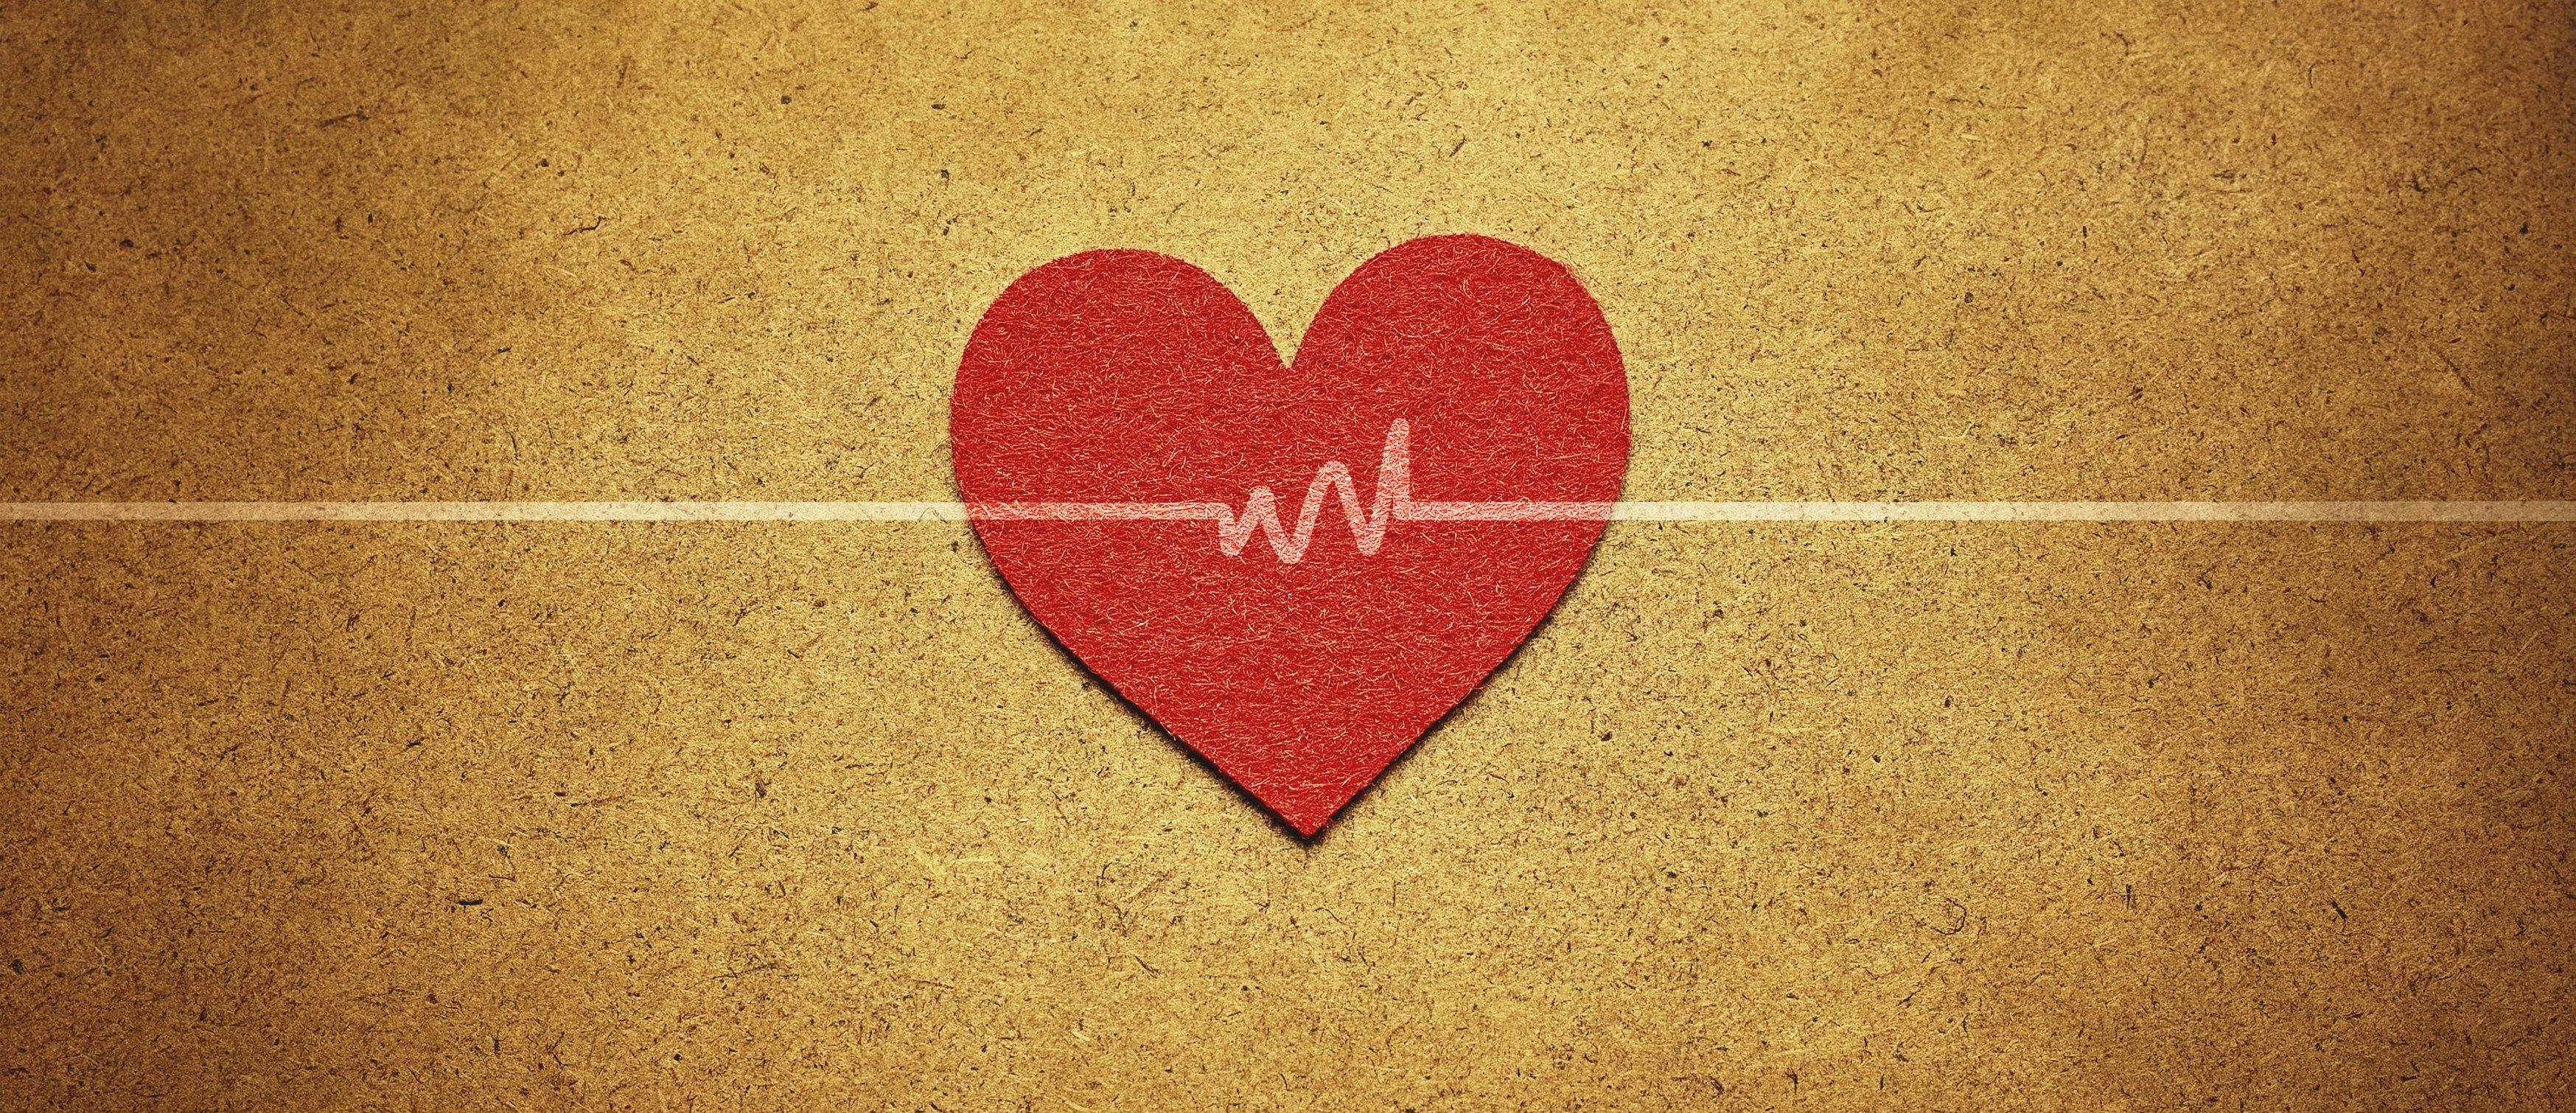 Can Vitamins Prevent Cardiovascular Calcification?